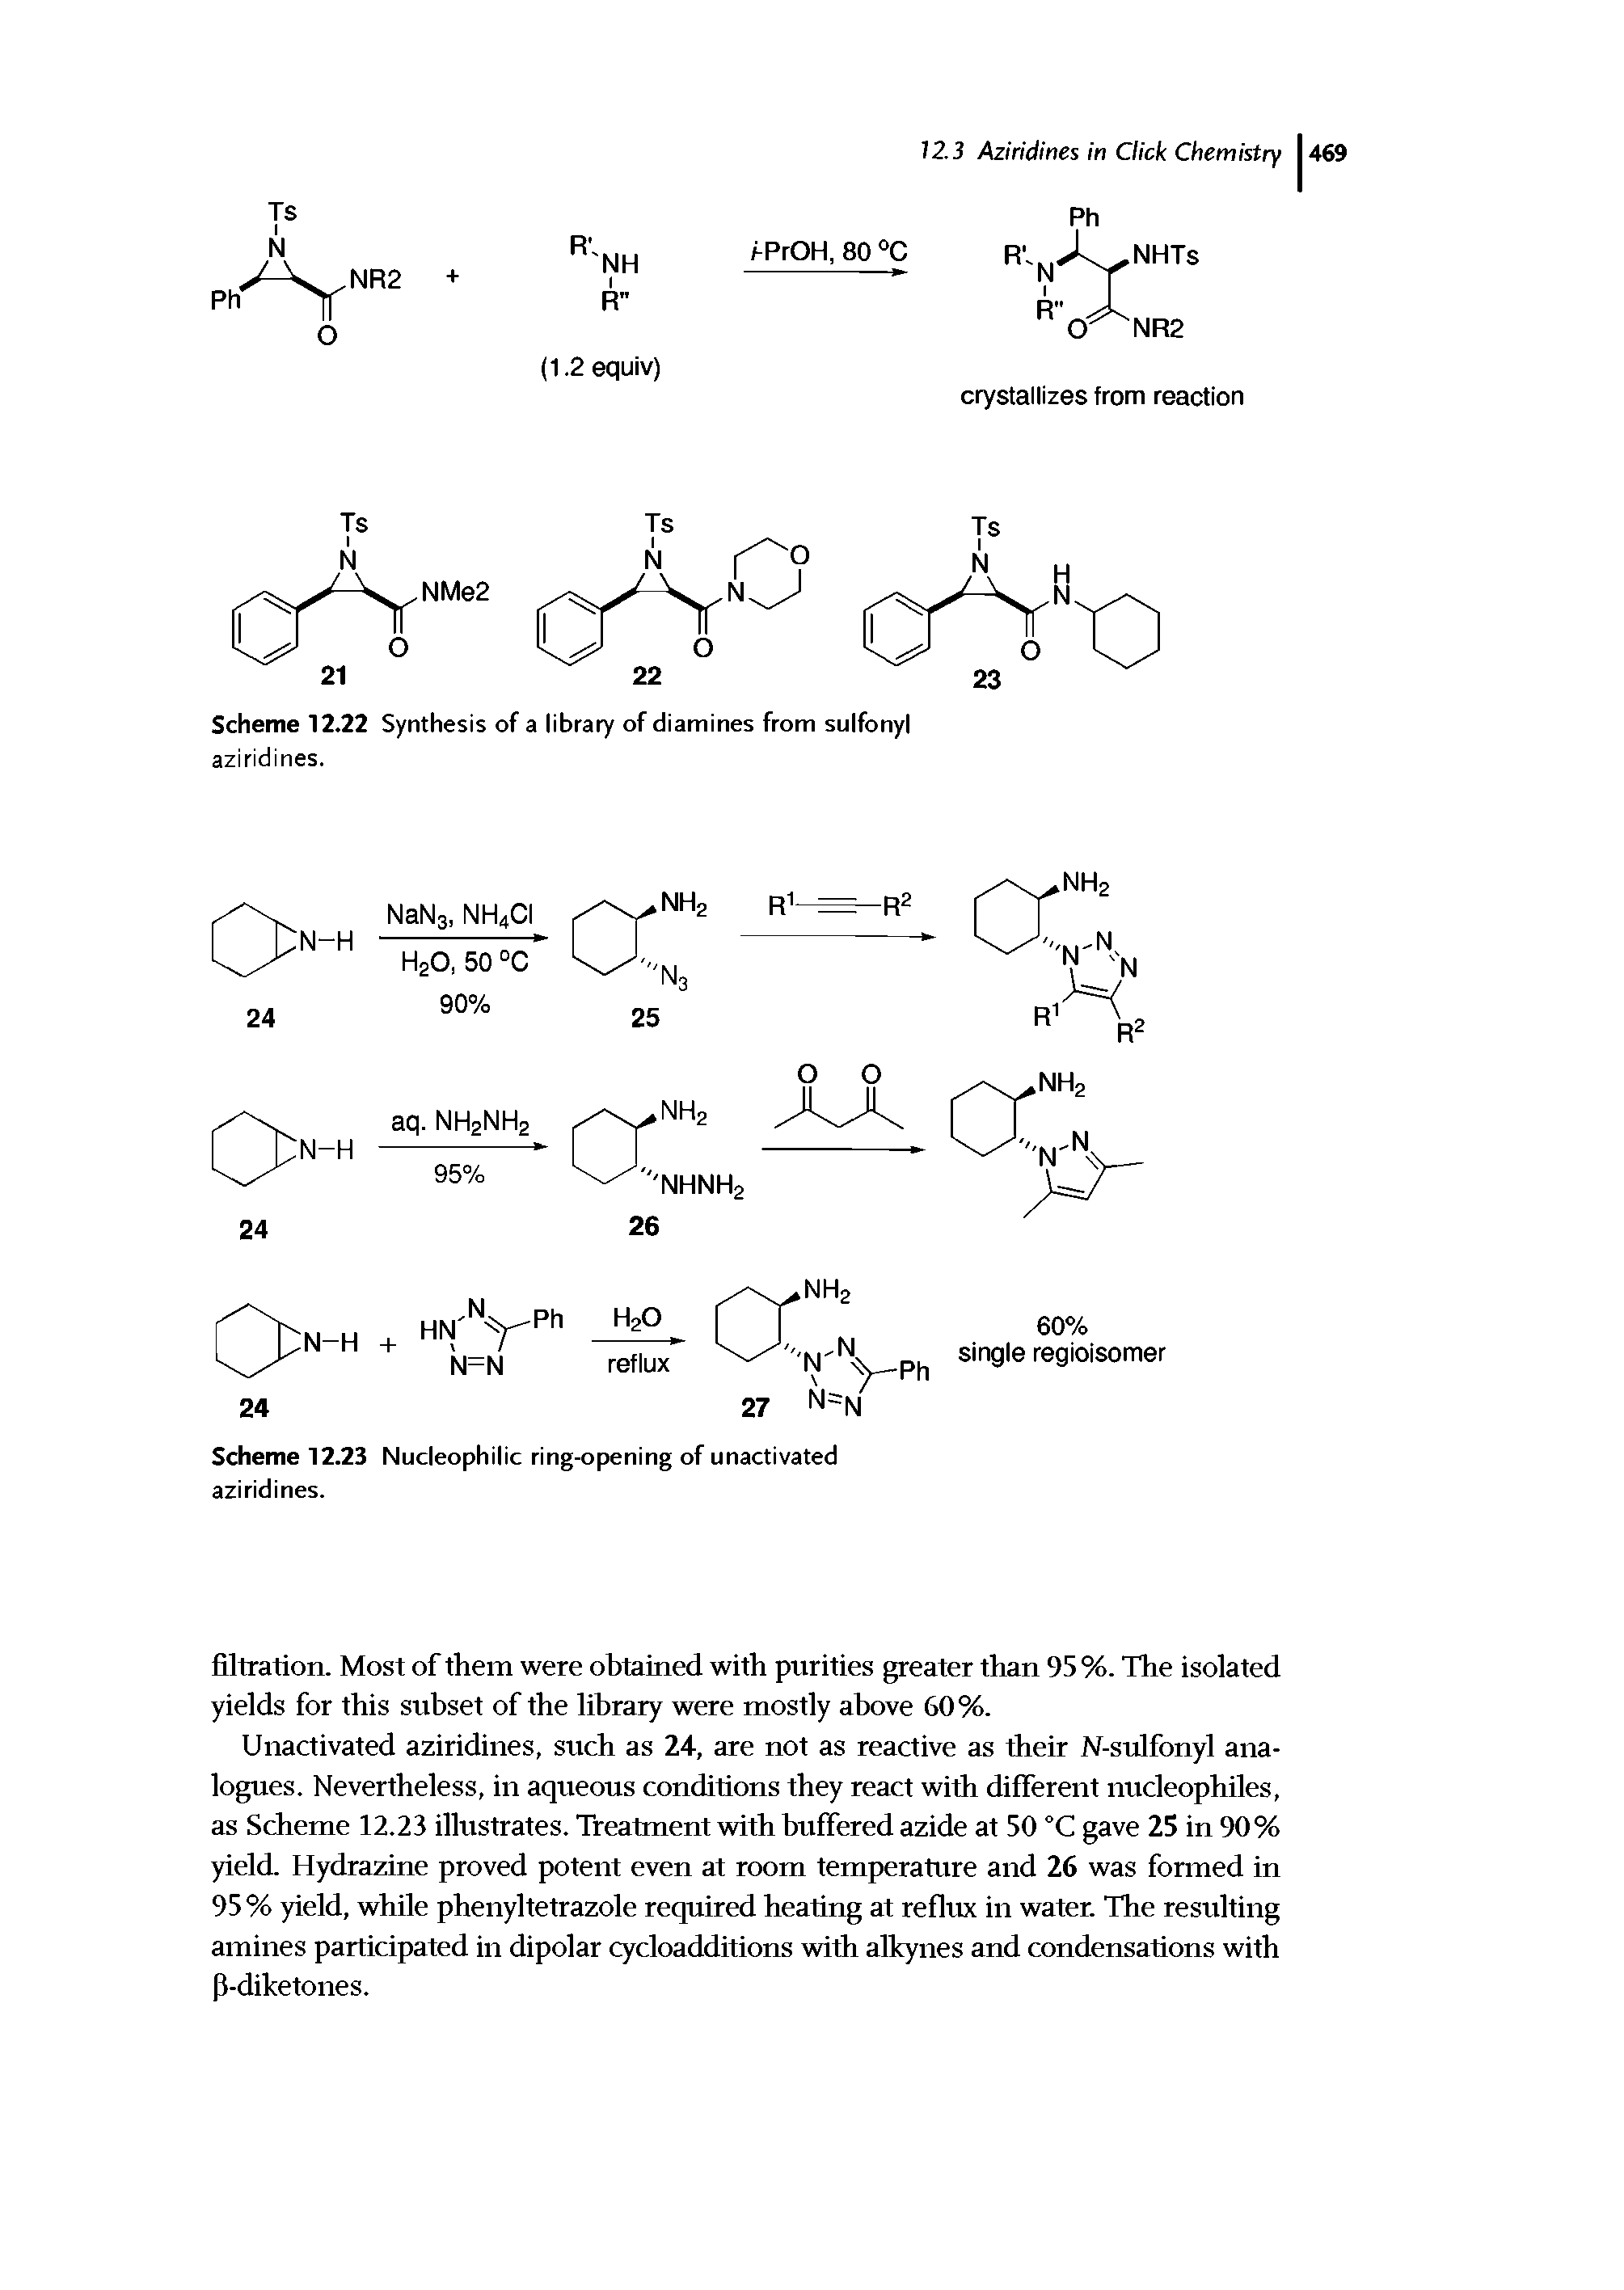 Scheme 12.22 Synthesis of a library of diamines from sulfonyl...